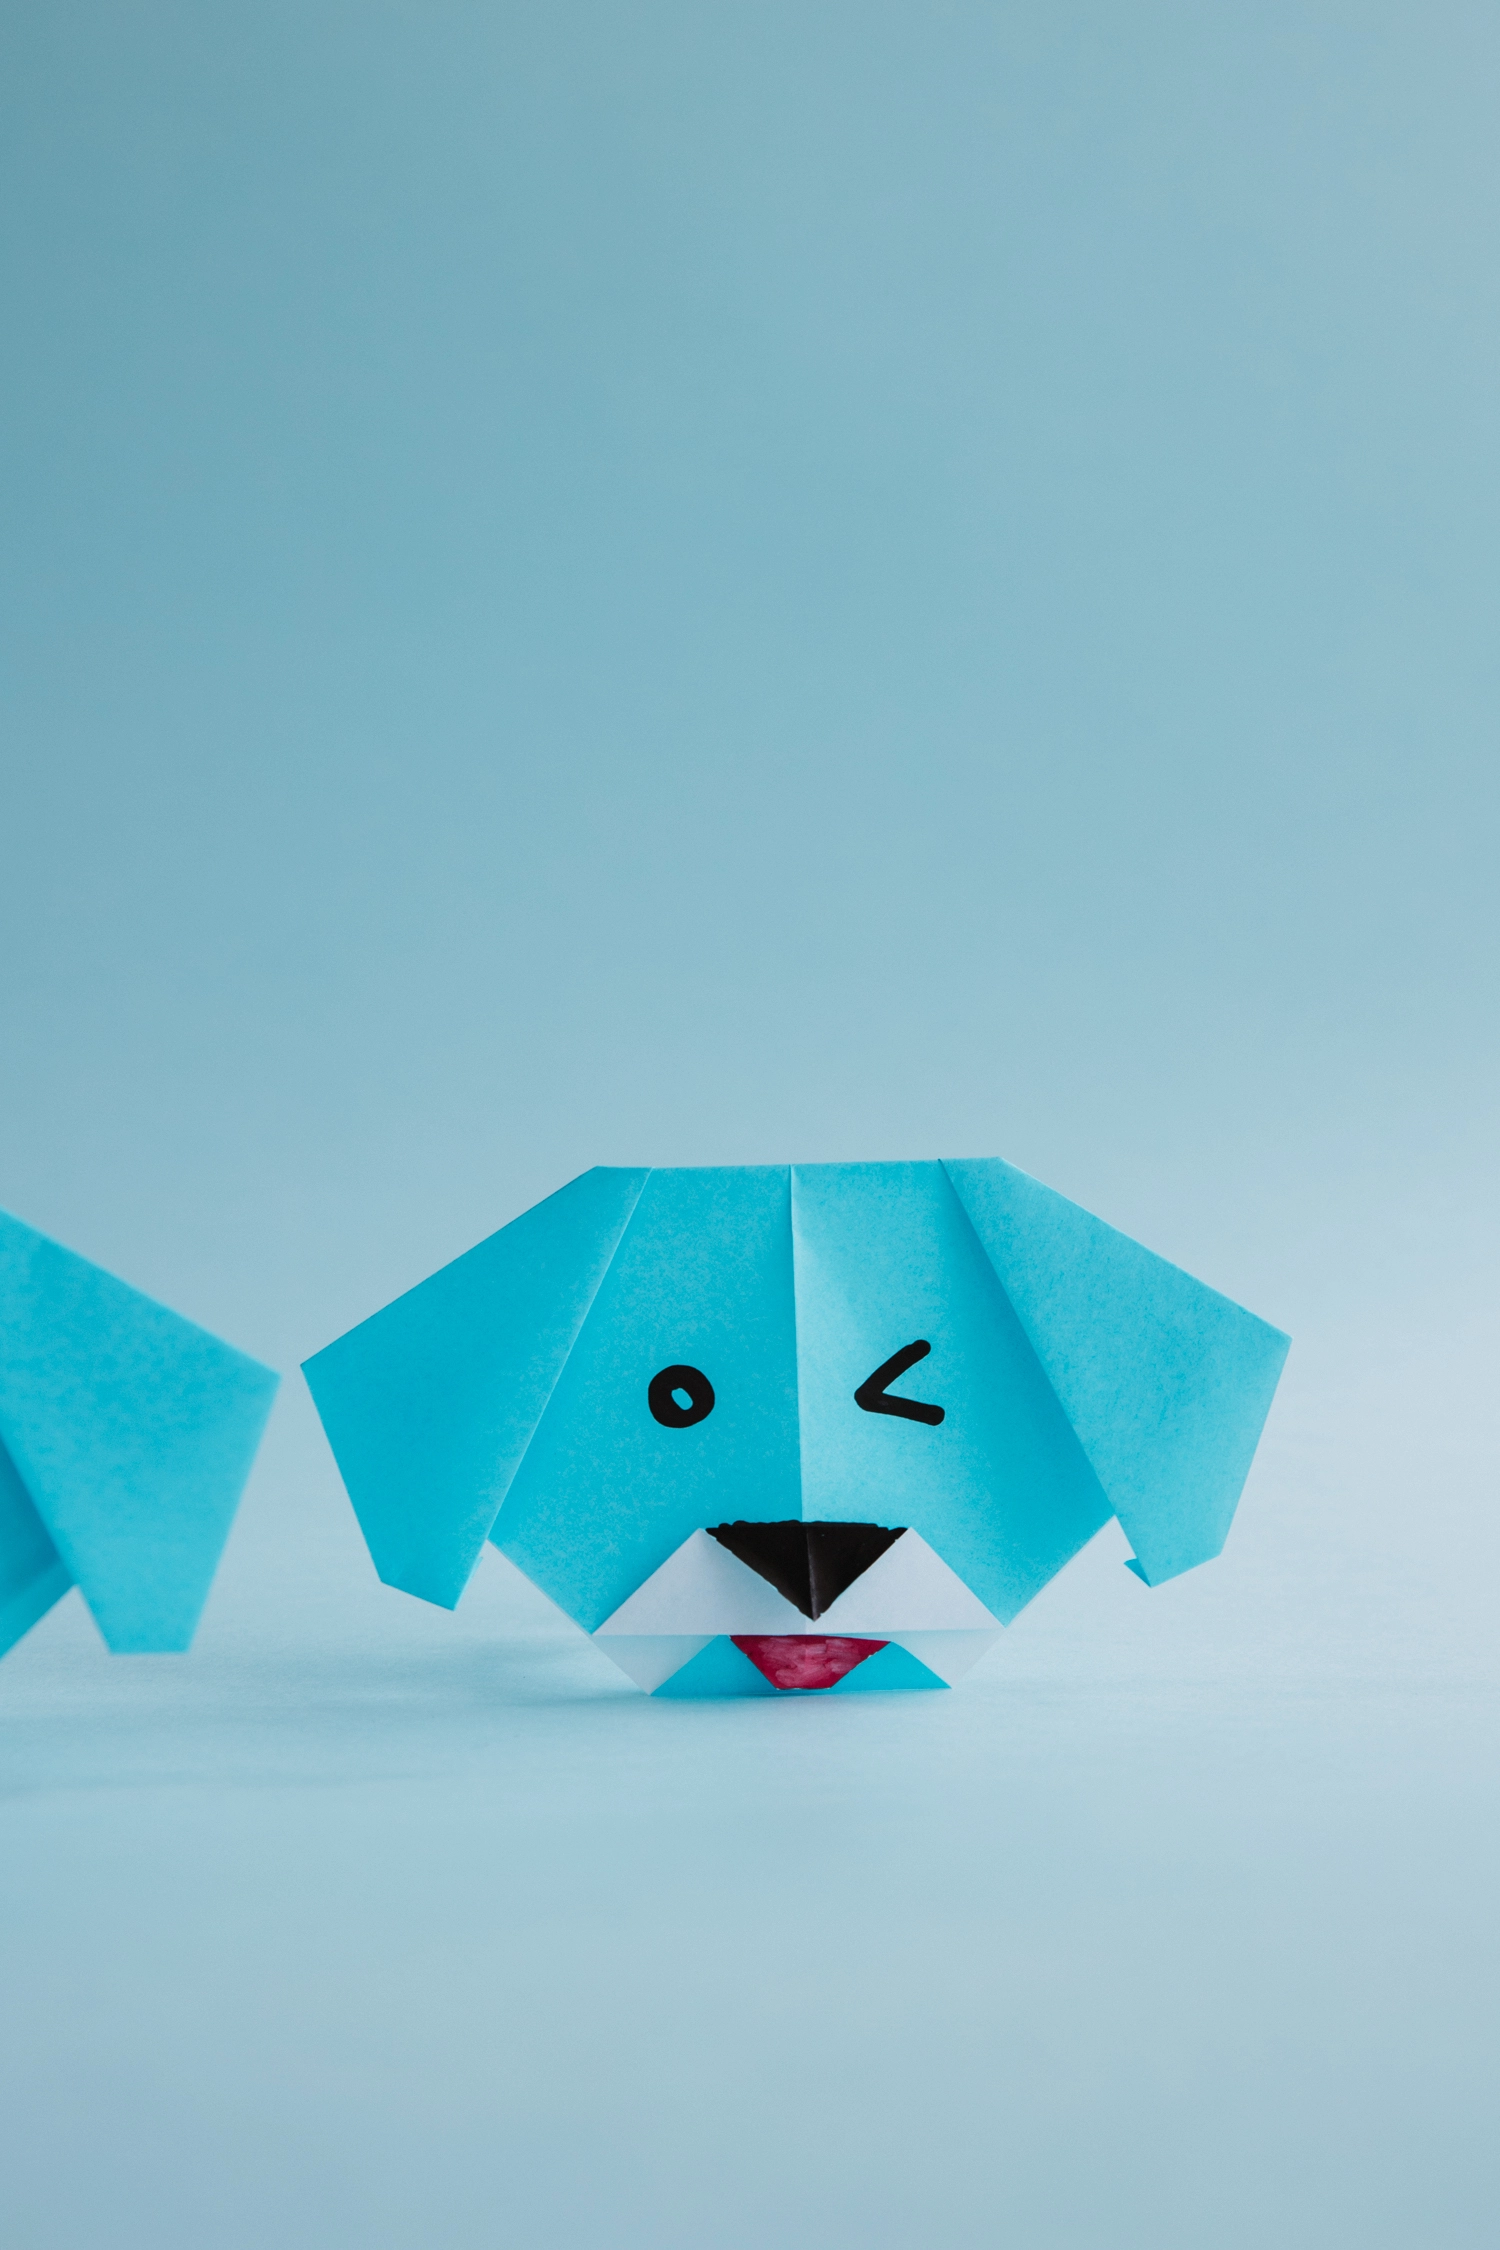 how to make origami dog face | origami ok